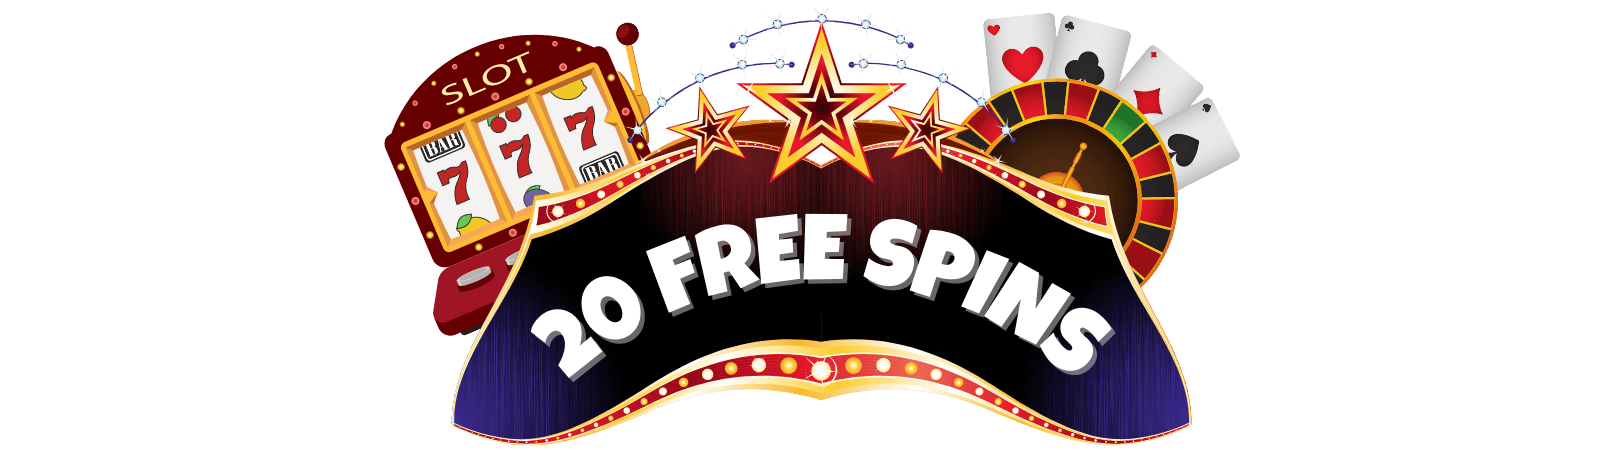 what is 20 free spins img